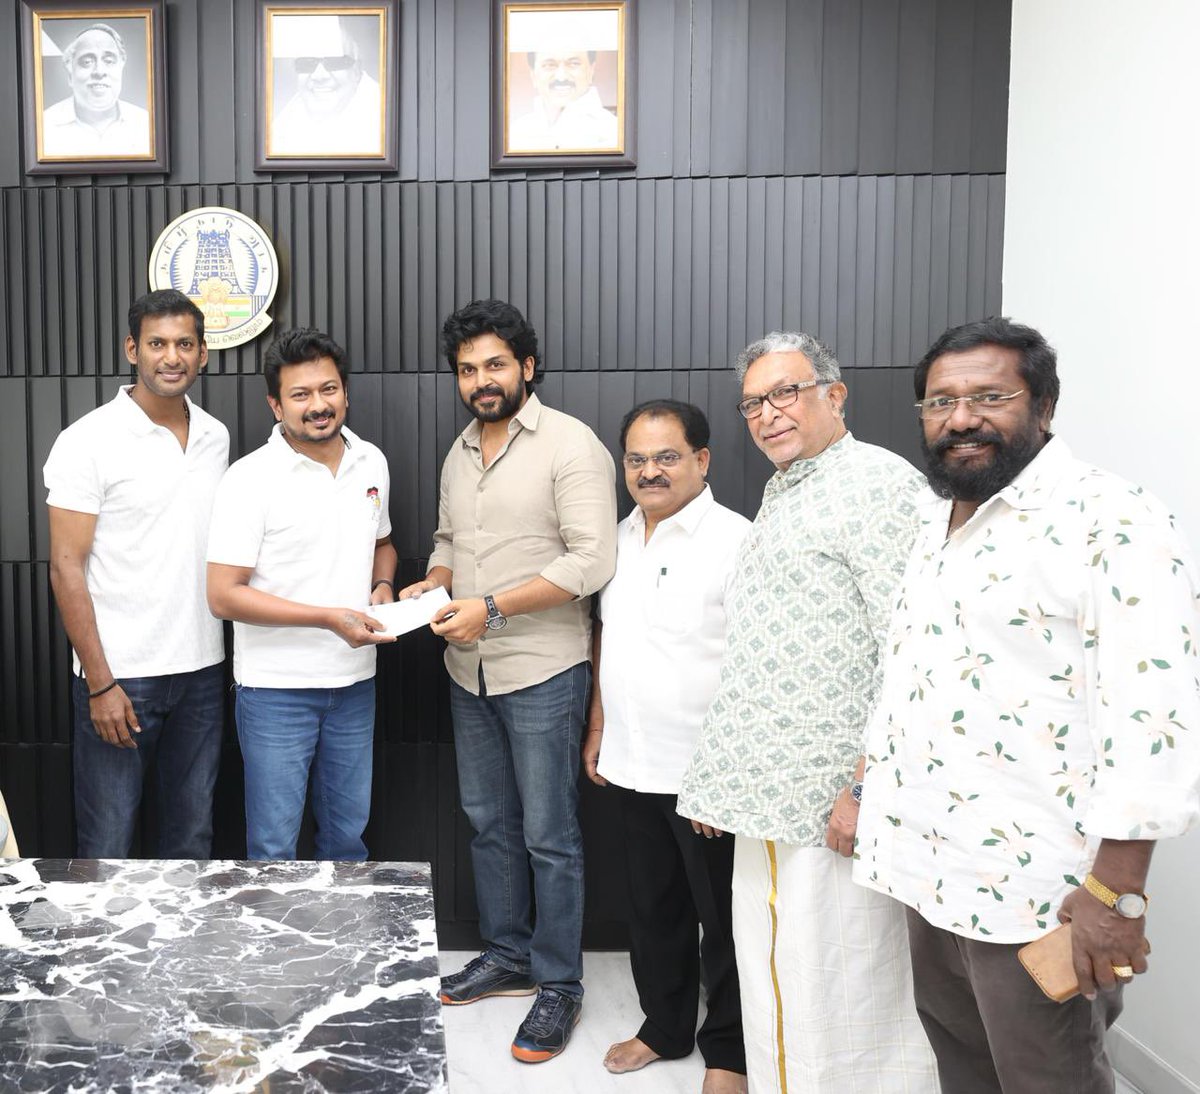 Dear Udhaya, I sincerely thank u as a friend, producer, actor and now sports minister of Tamil Nadu govt for your contribution to our South Indian artistes association building efforts and your willingness to finish it as early as possible and also coming forward to help in any